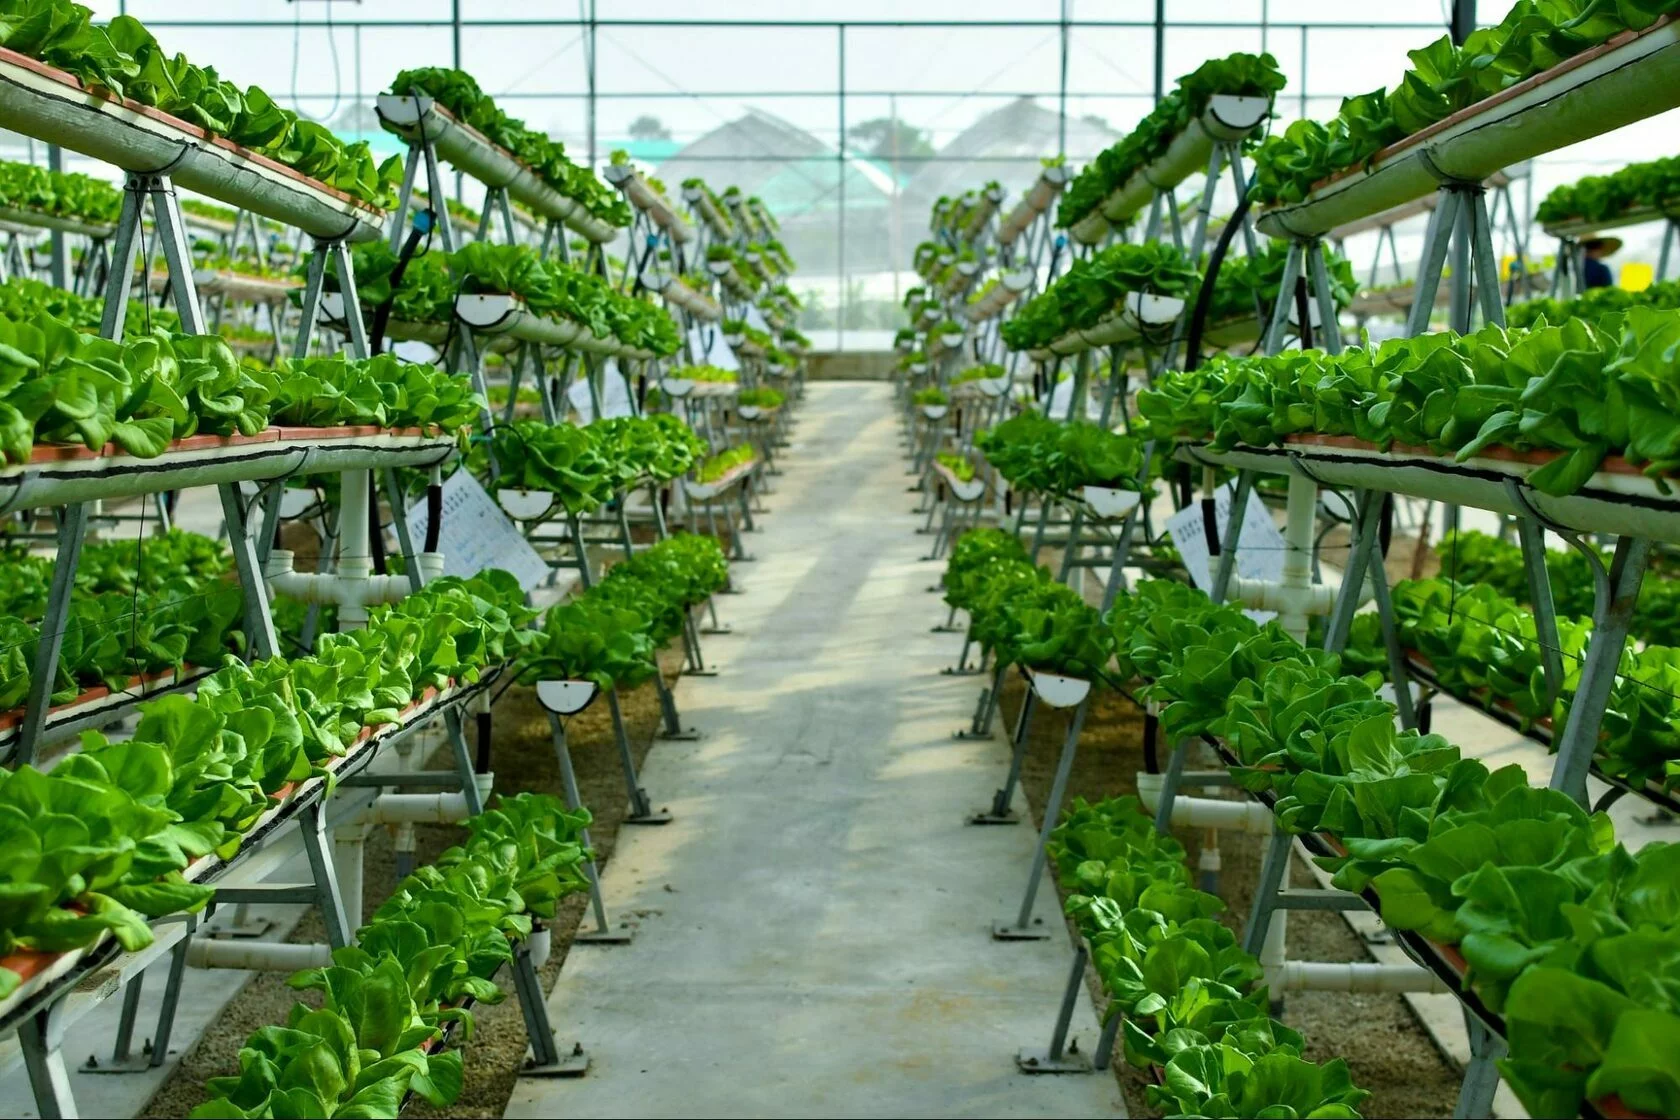 This image demonstrates a space-saving approach to wick hydroponics in commercial greenhouses. Plants are grown in vertical towers with wicks delivering hydroponic nutrients, maximizing the use of available space.